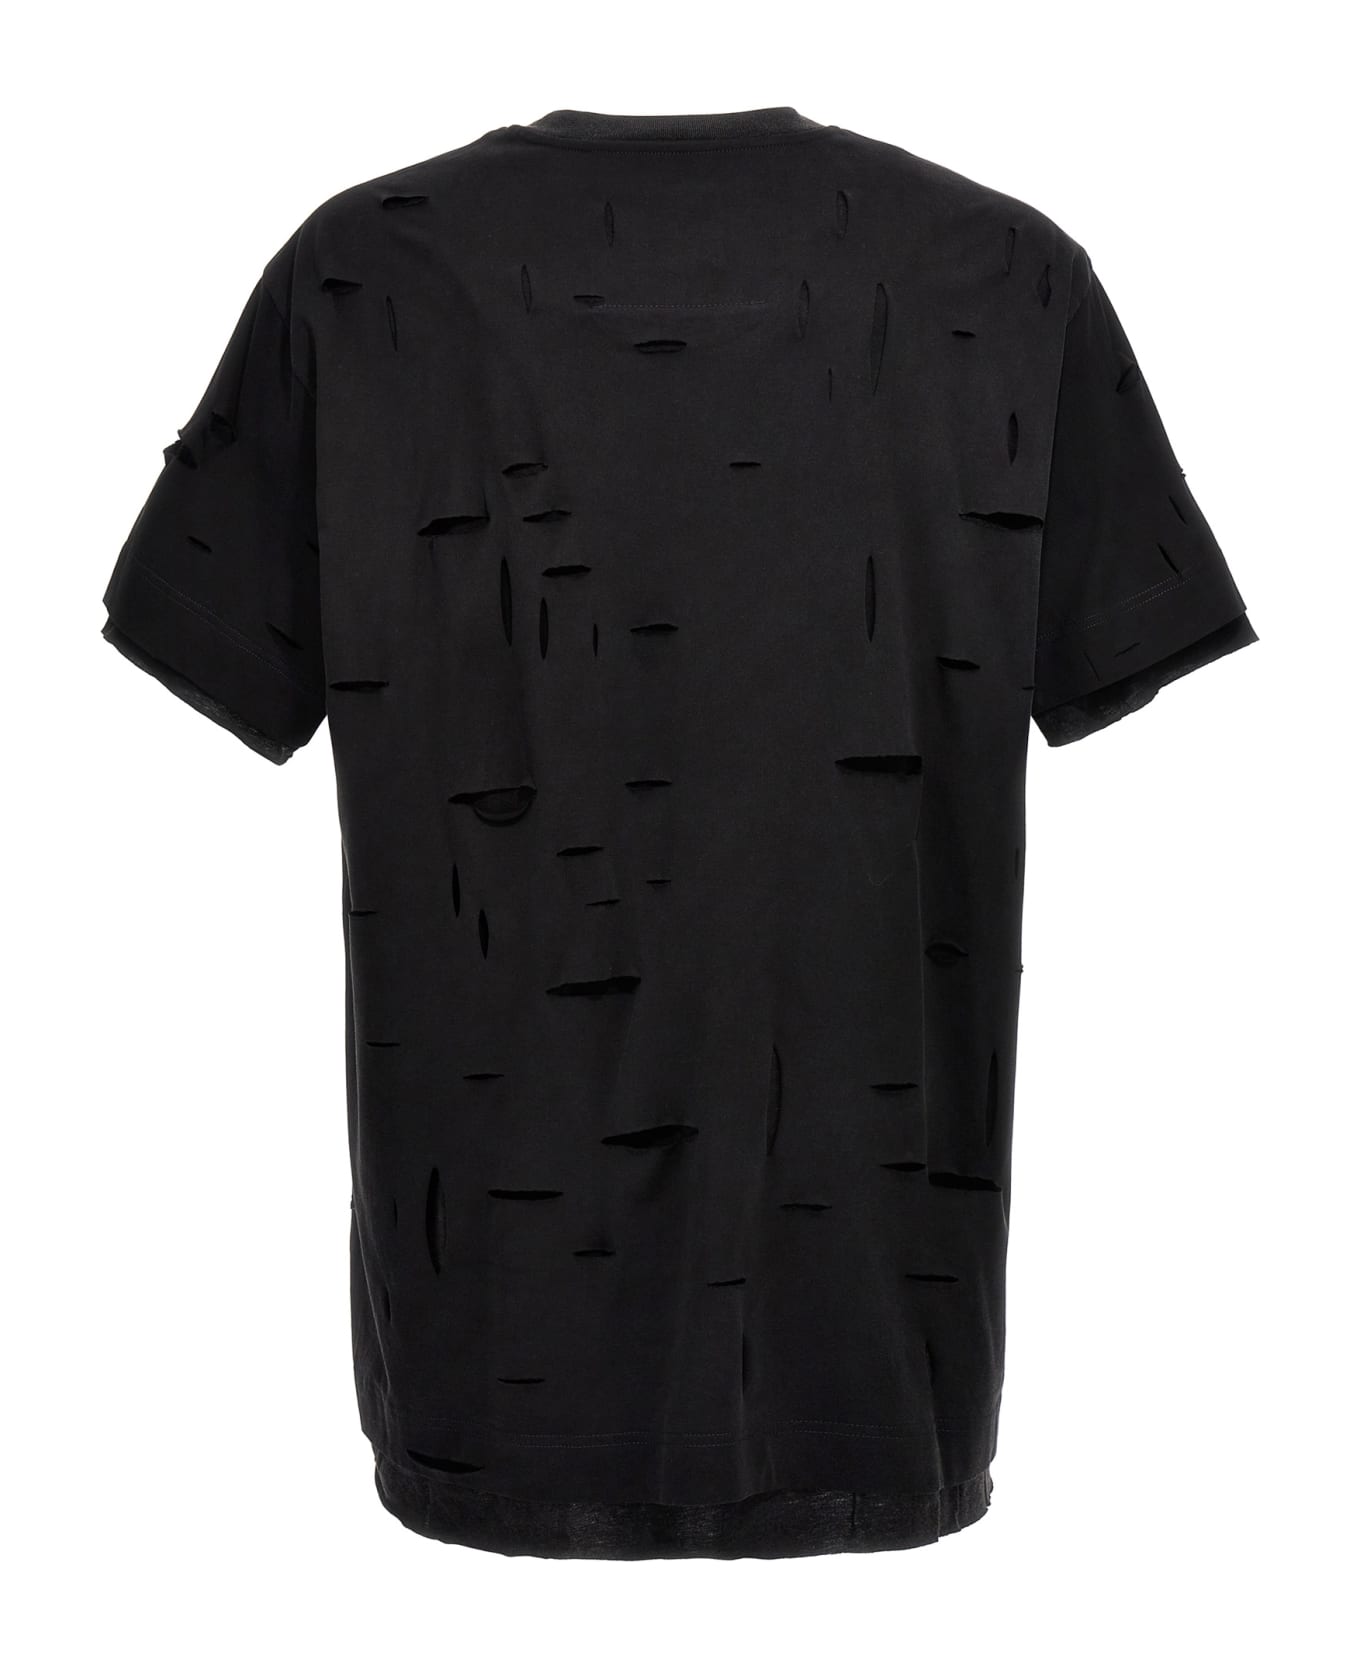 Givenchy Destroyed Effect T-shirt - Black シャツ